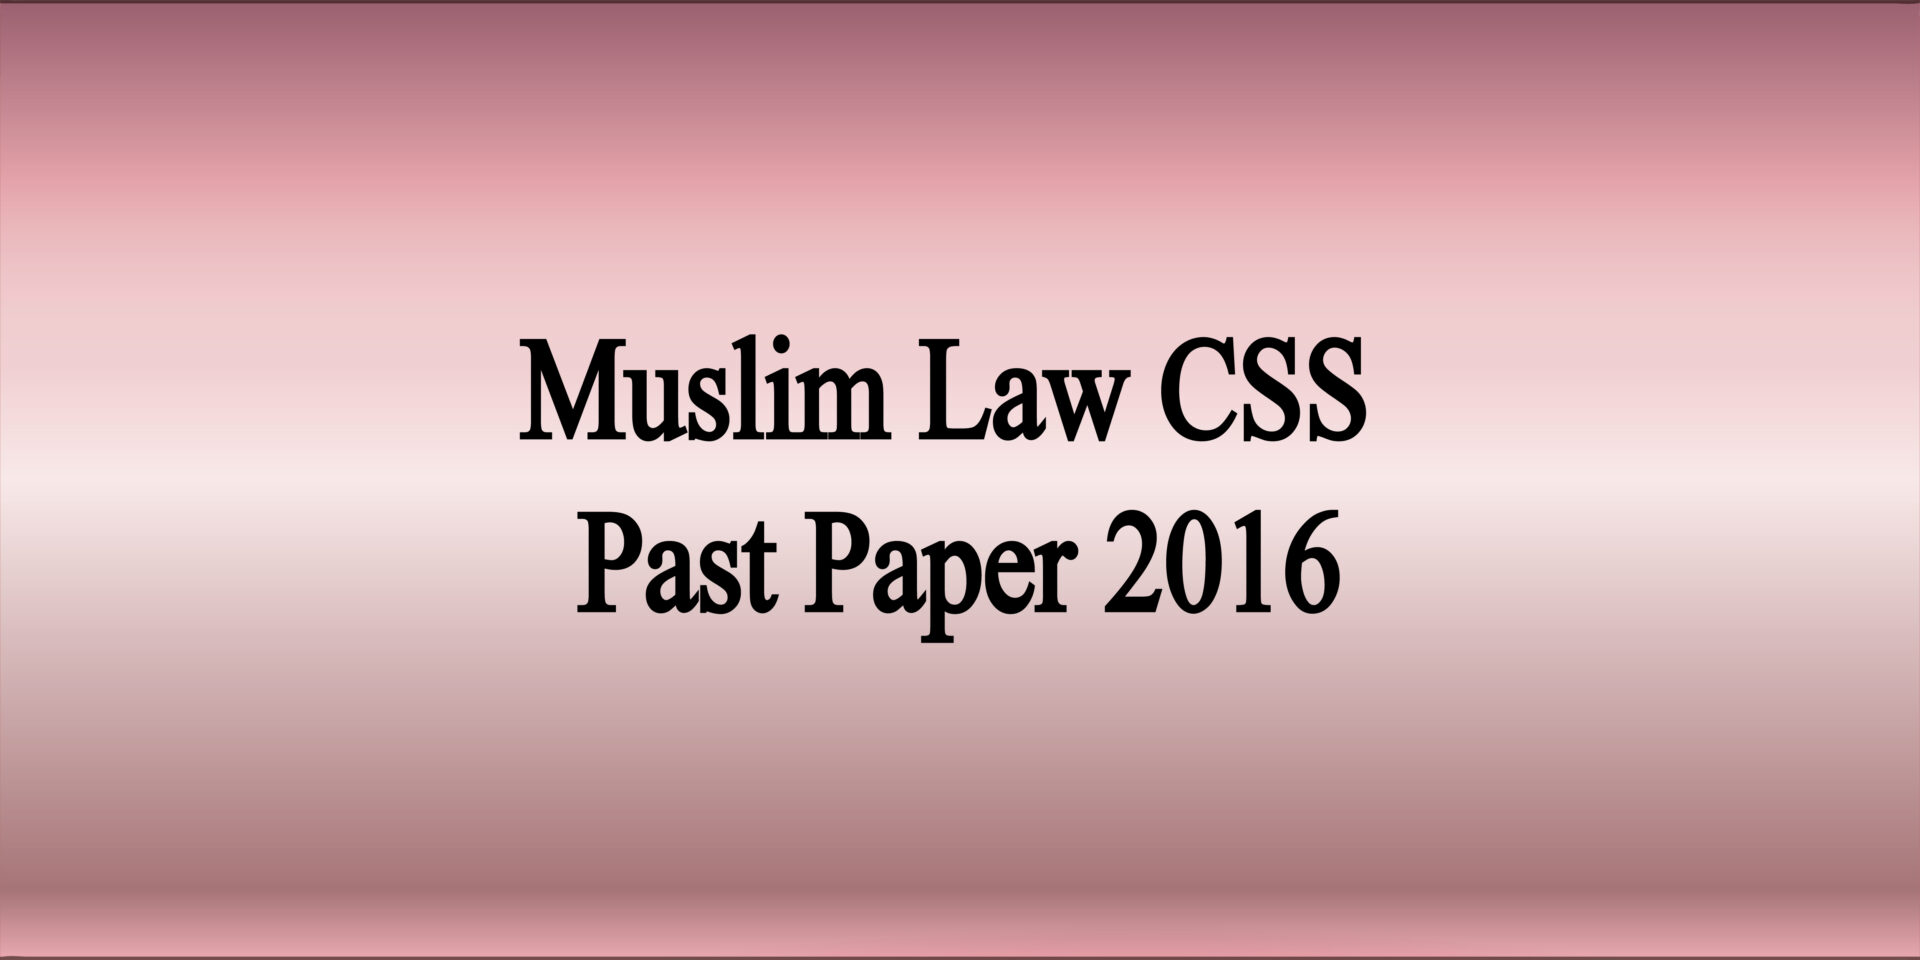 Muslim Law CSS Past Paper 2016